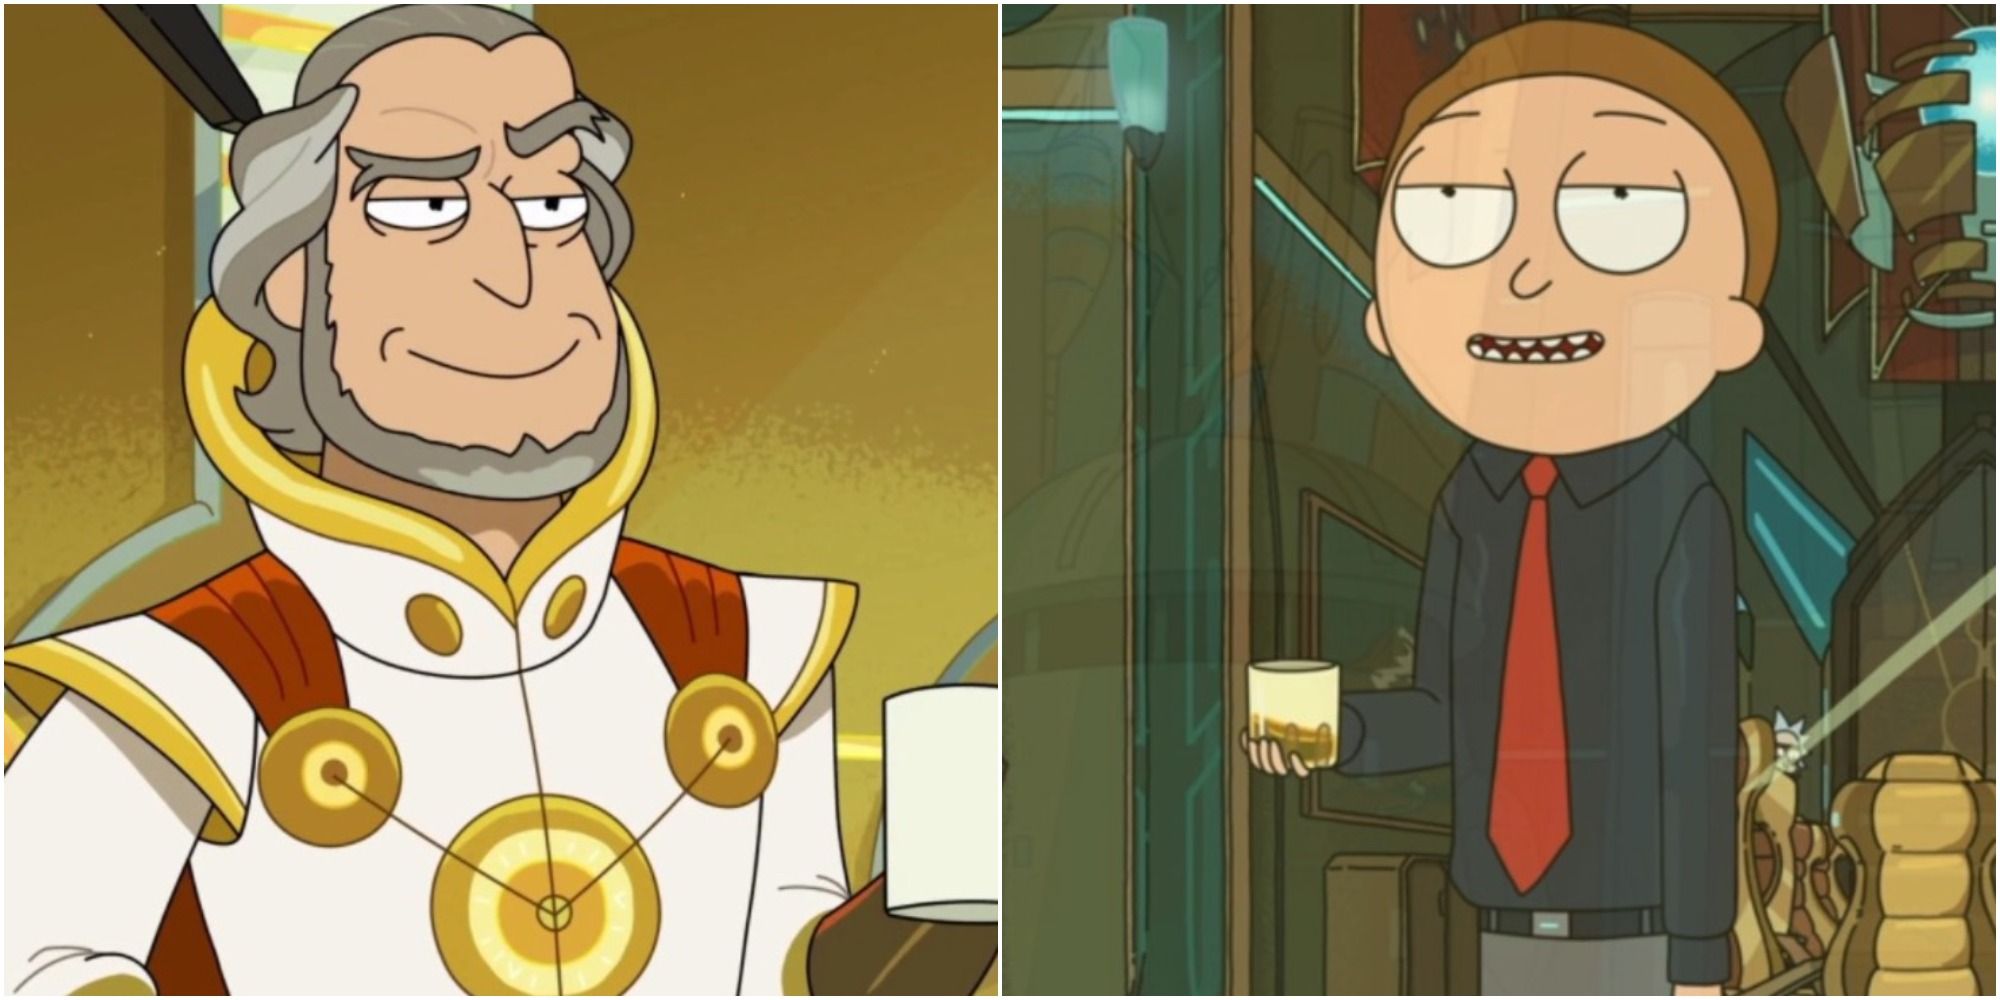 What are you thoughts on 'Evil' Morty? : r/rickandmorty